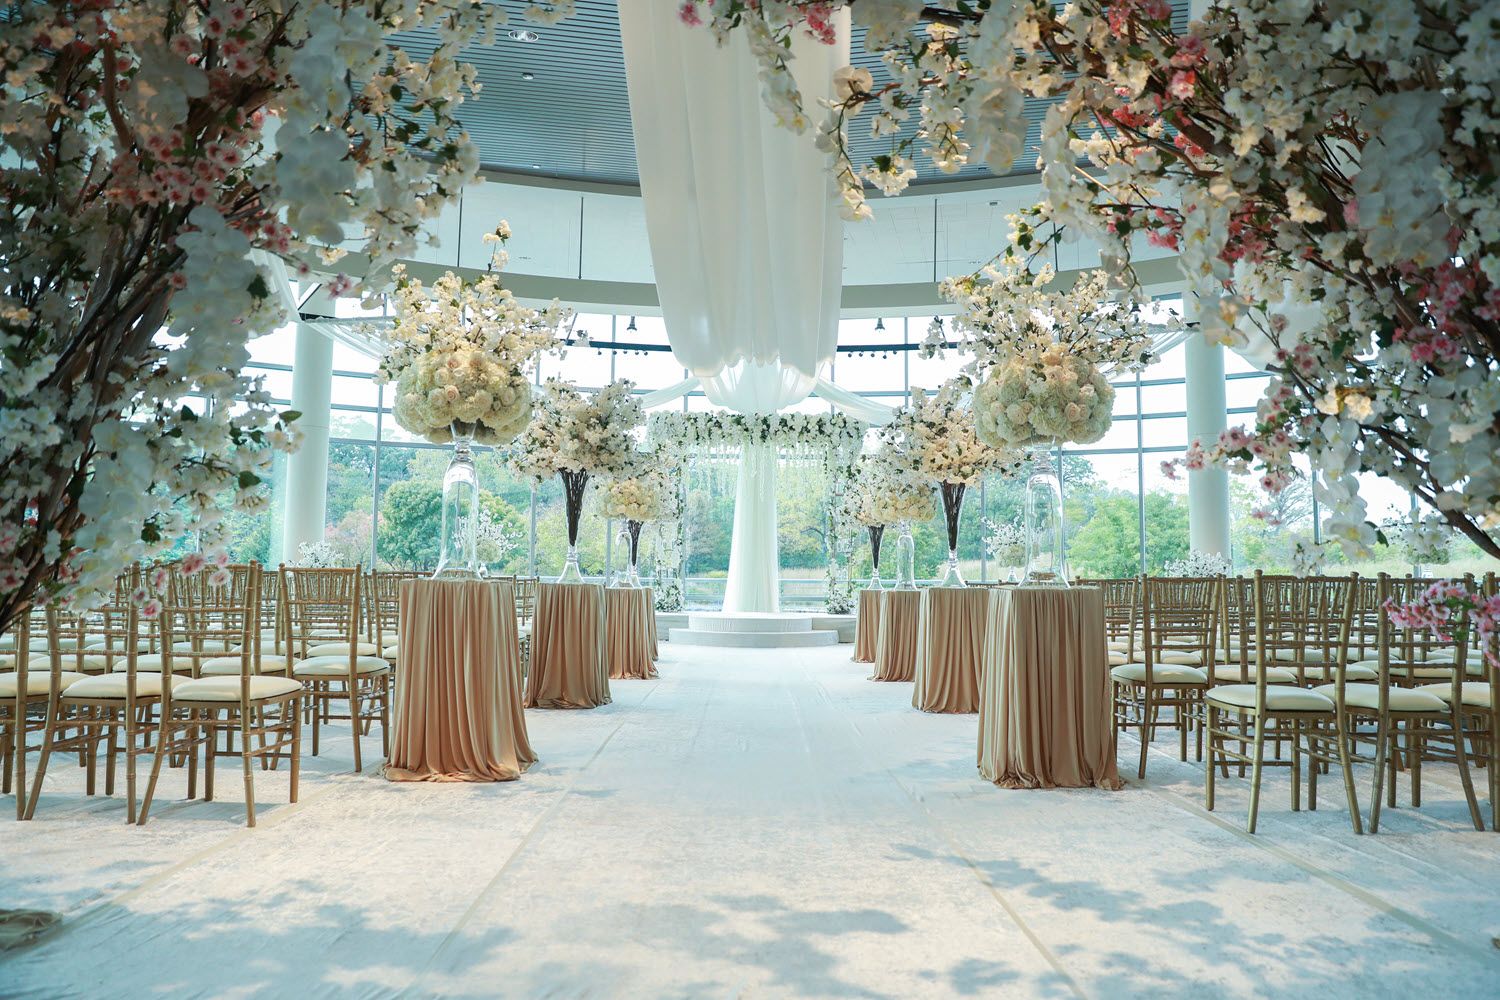 Beautifully decorated ballroom for a wedding ceremony.